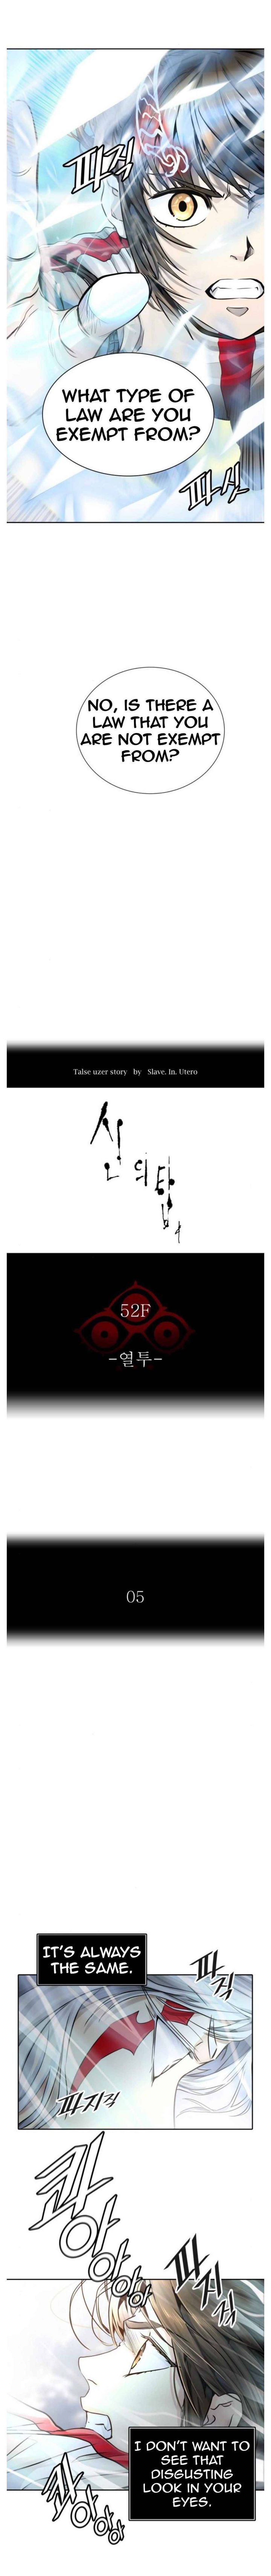 Tower Of God 496 10